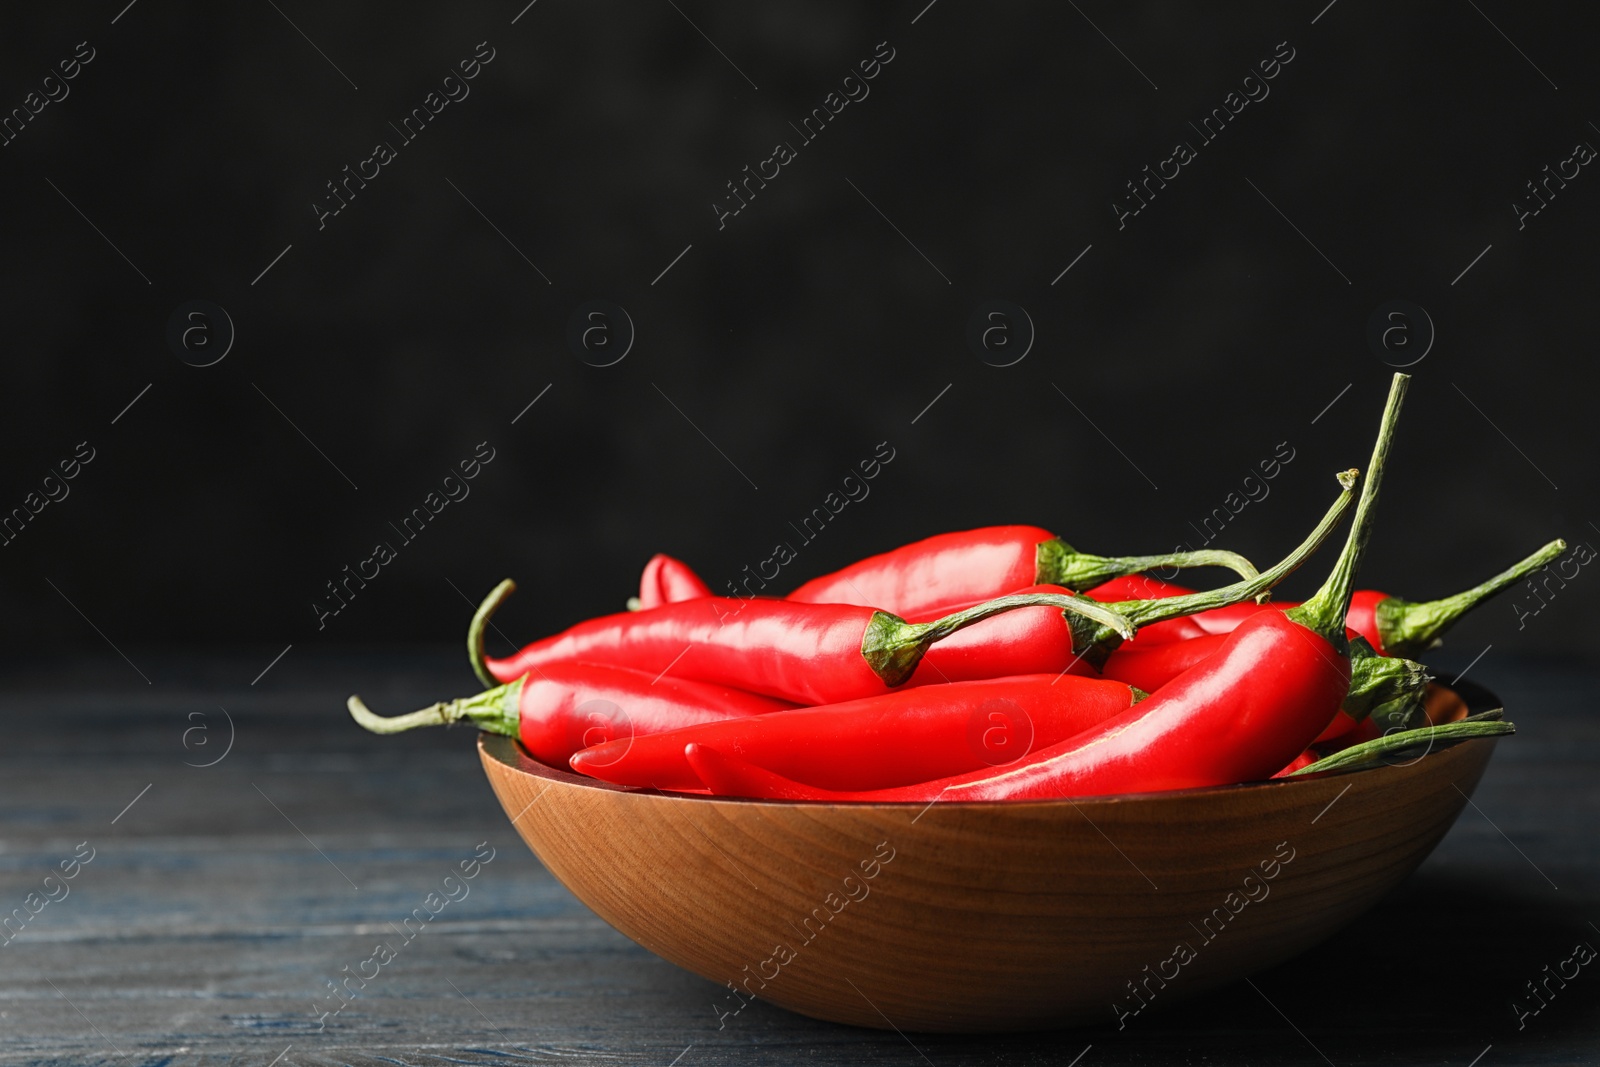 Photo of Bowl with red hot chili peppers on wooden table against black background. Space for text